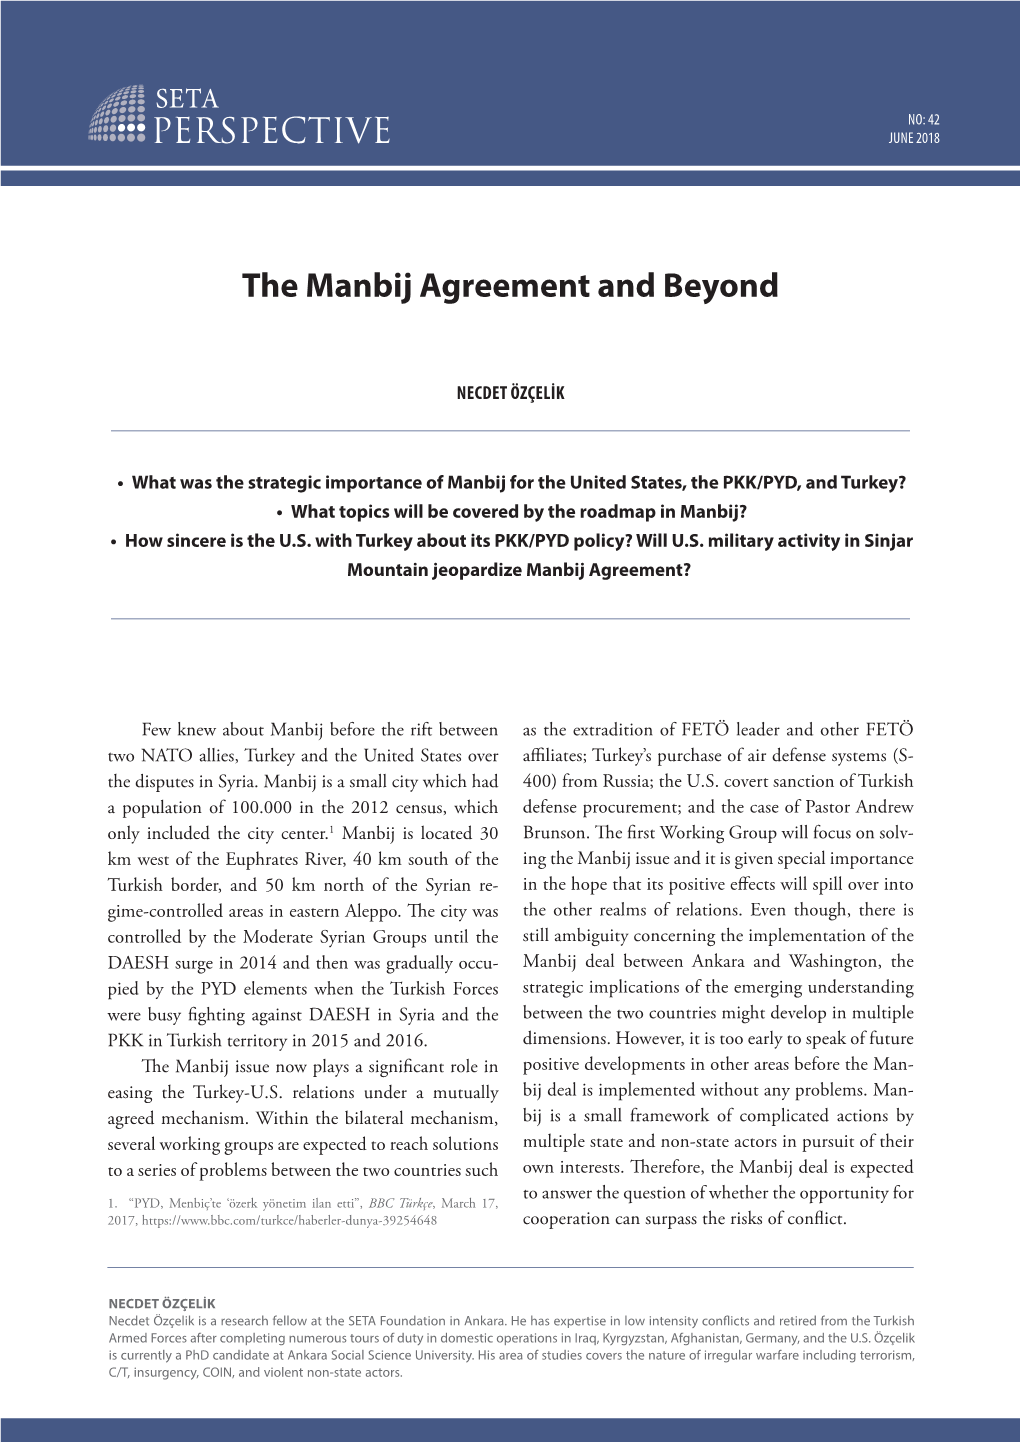 The Manbij Agreement and Beyond